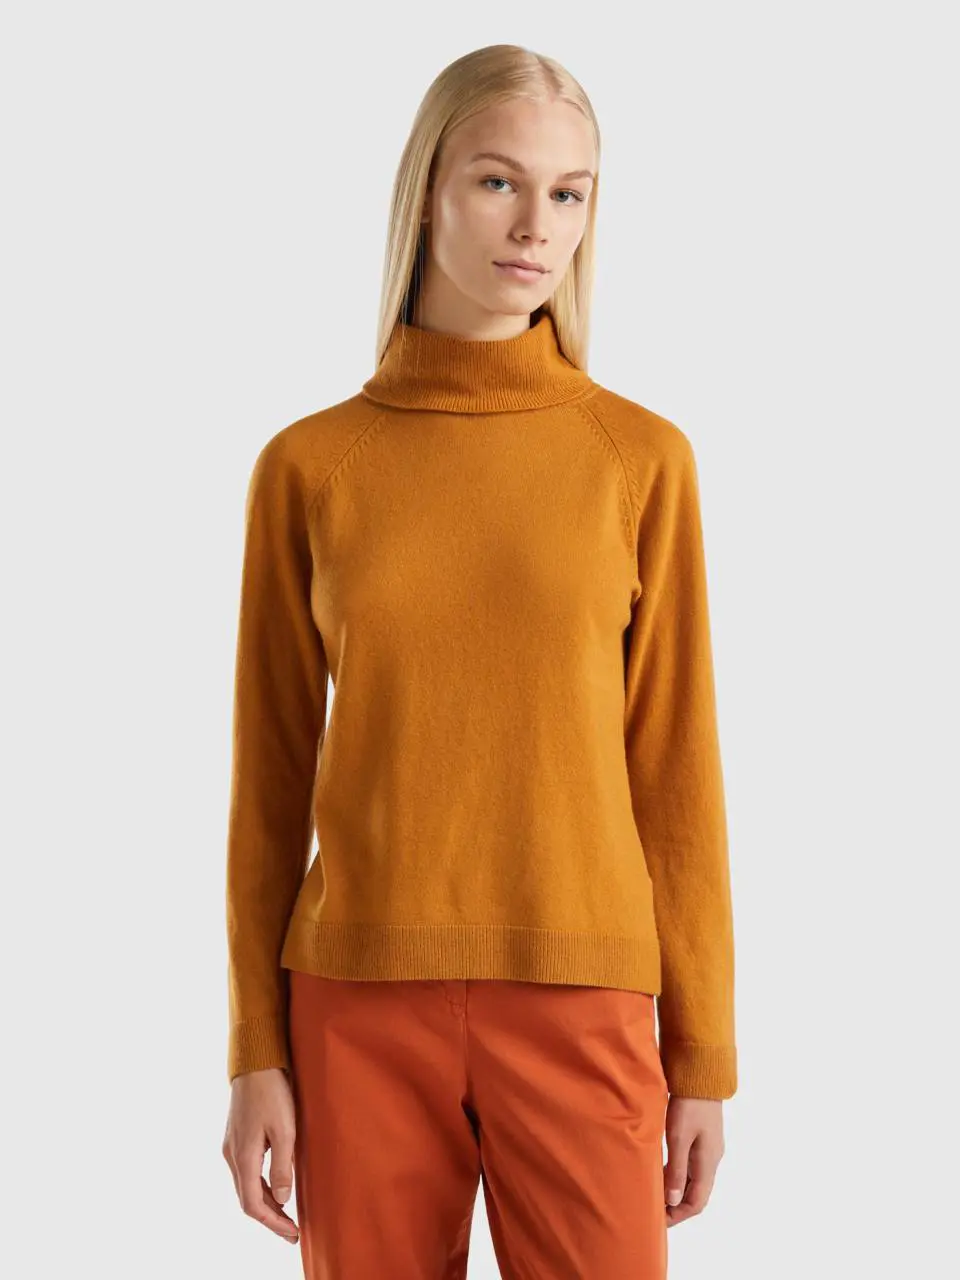 Benetton tobacco turtleneck in cashmere and wool blend. 1